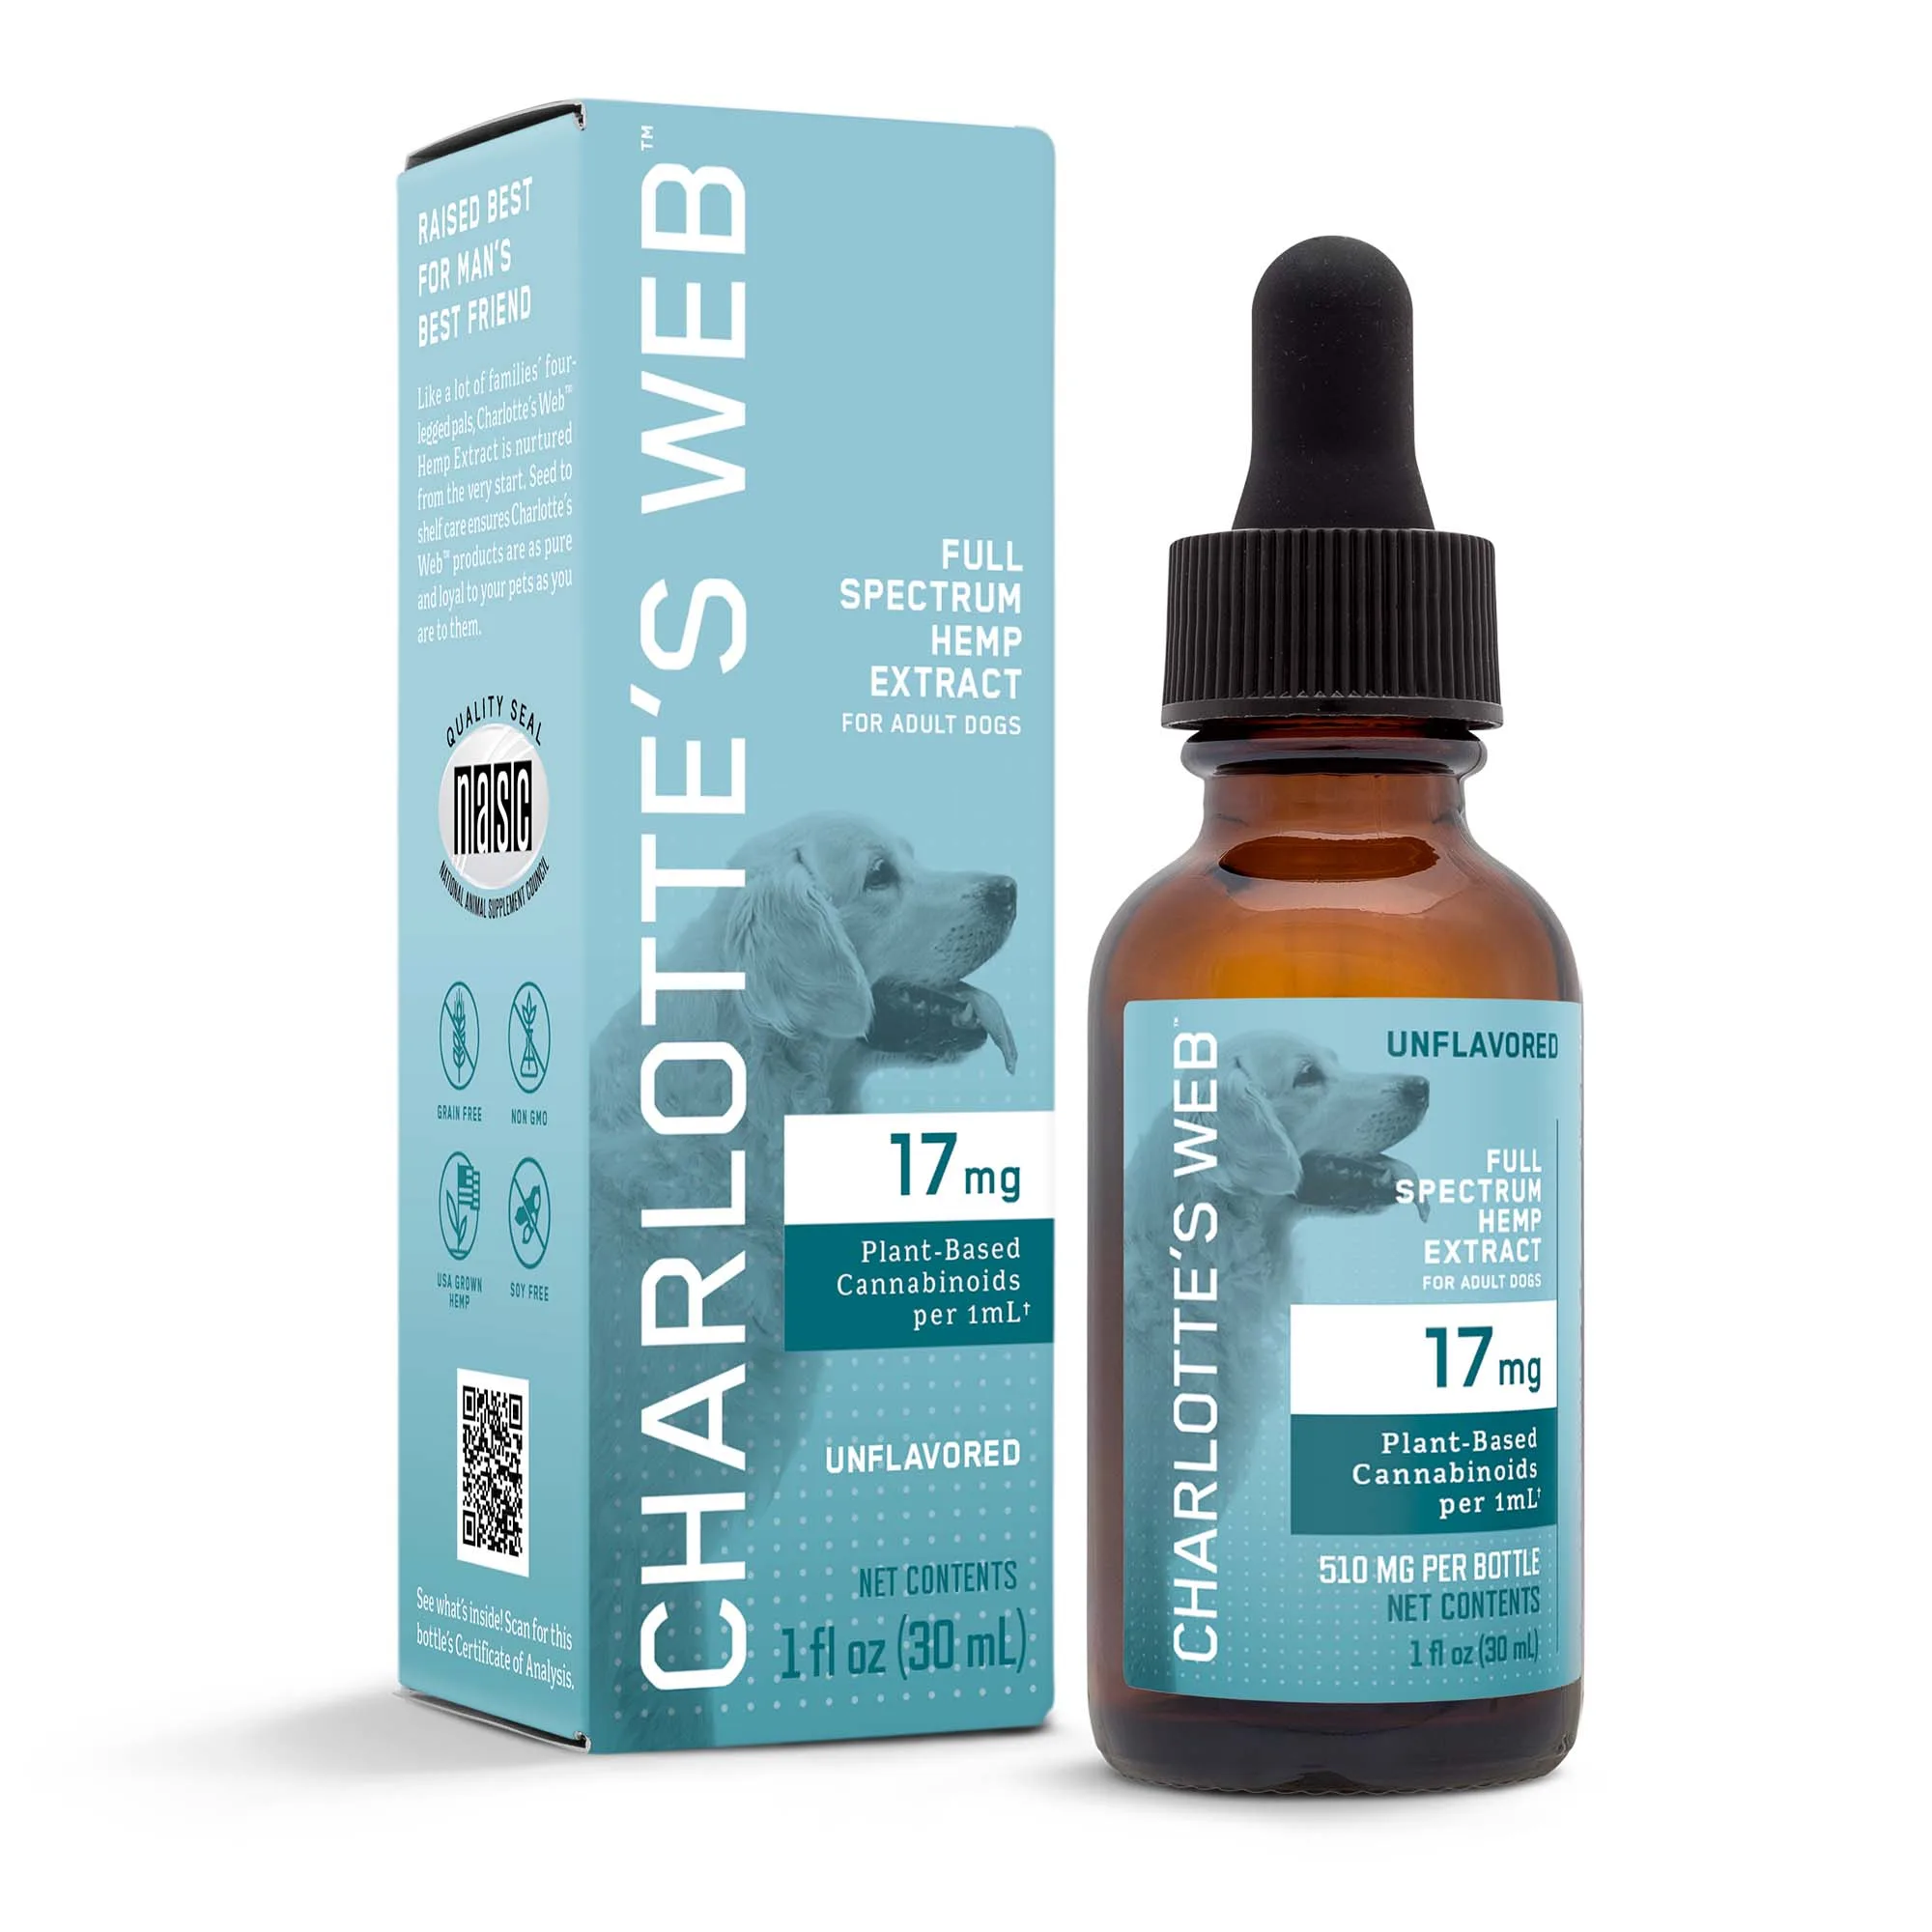 Charlotte’s Web, Hemp Extract for Adult Dogs, Unflavored, Full Spectrum, 1fl oz, 510mg CBD